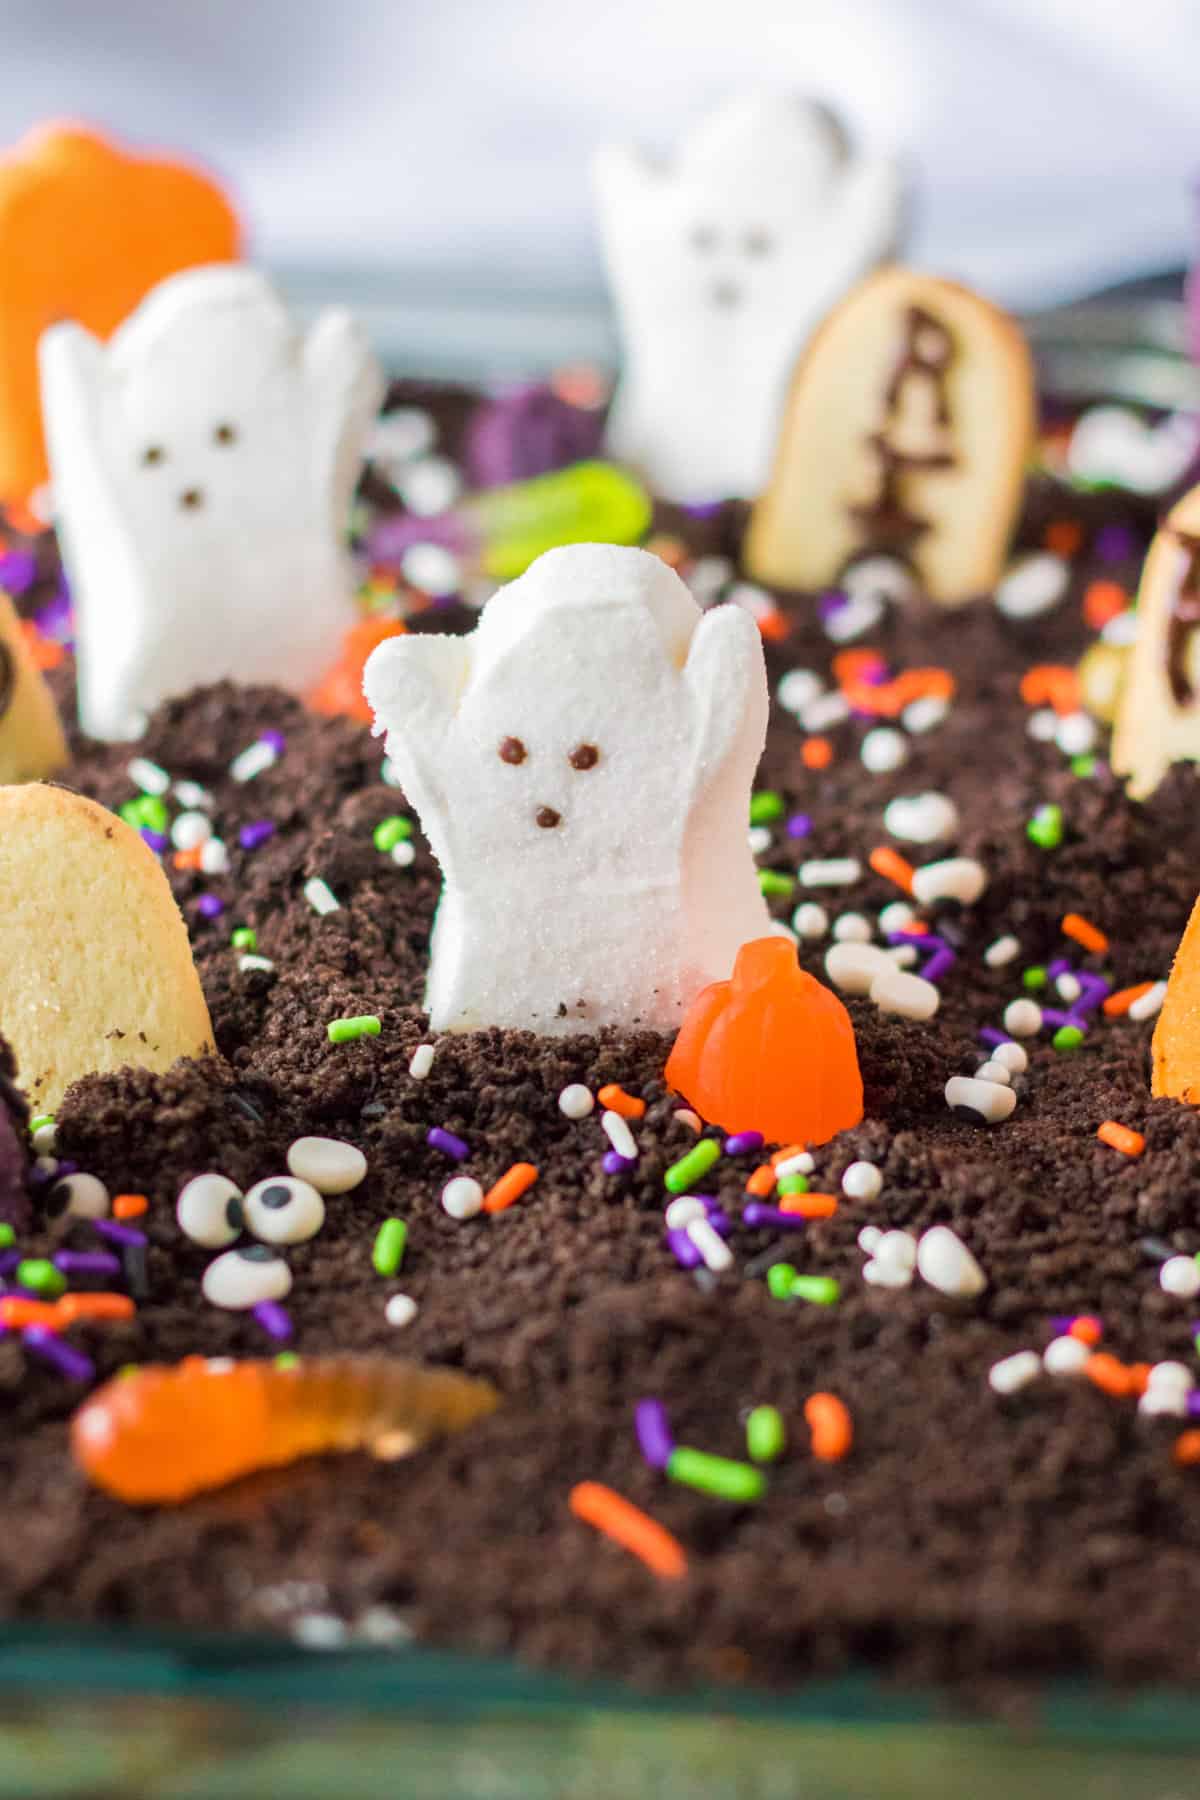 Ghosts in the graveyard halloween poke cake with marshmallow peep ghosts, pumpkins, cats, and cookie tombstones on top.